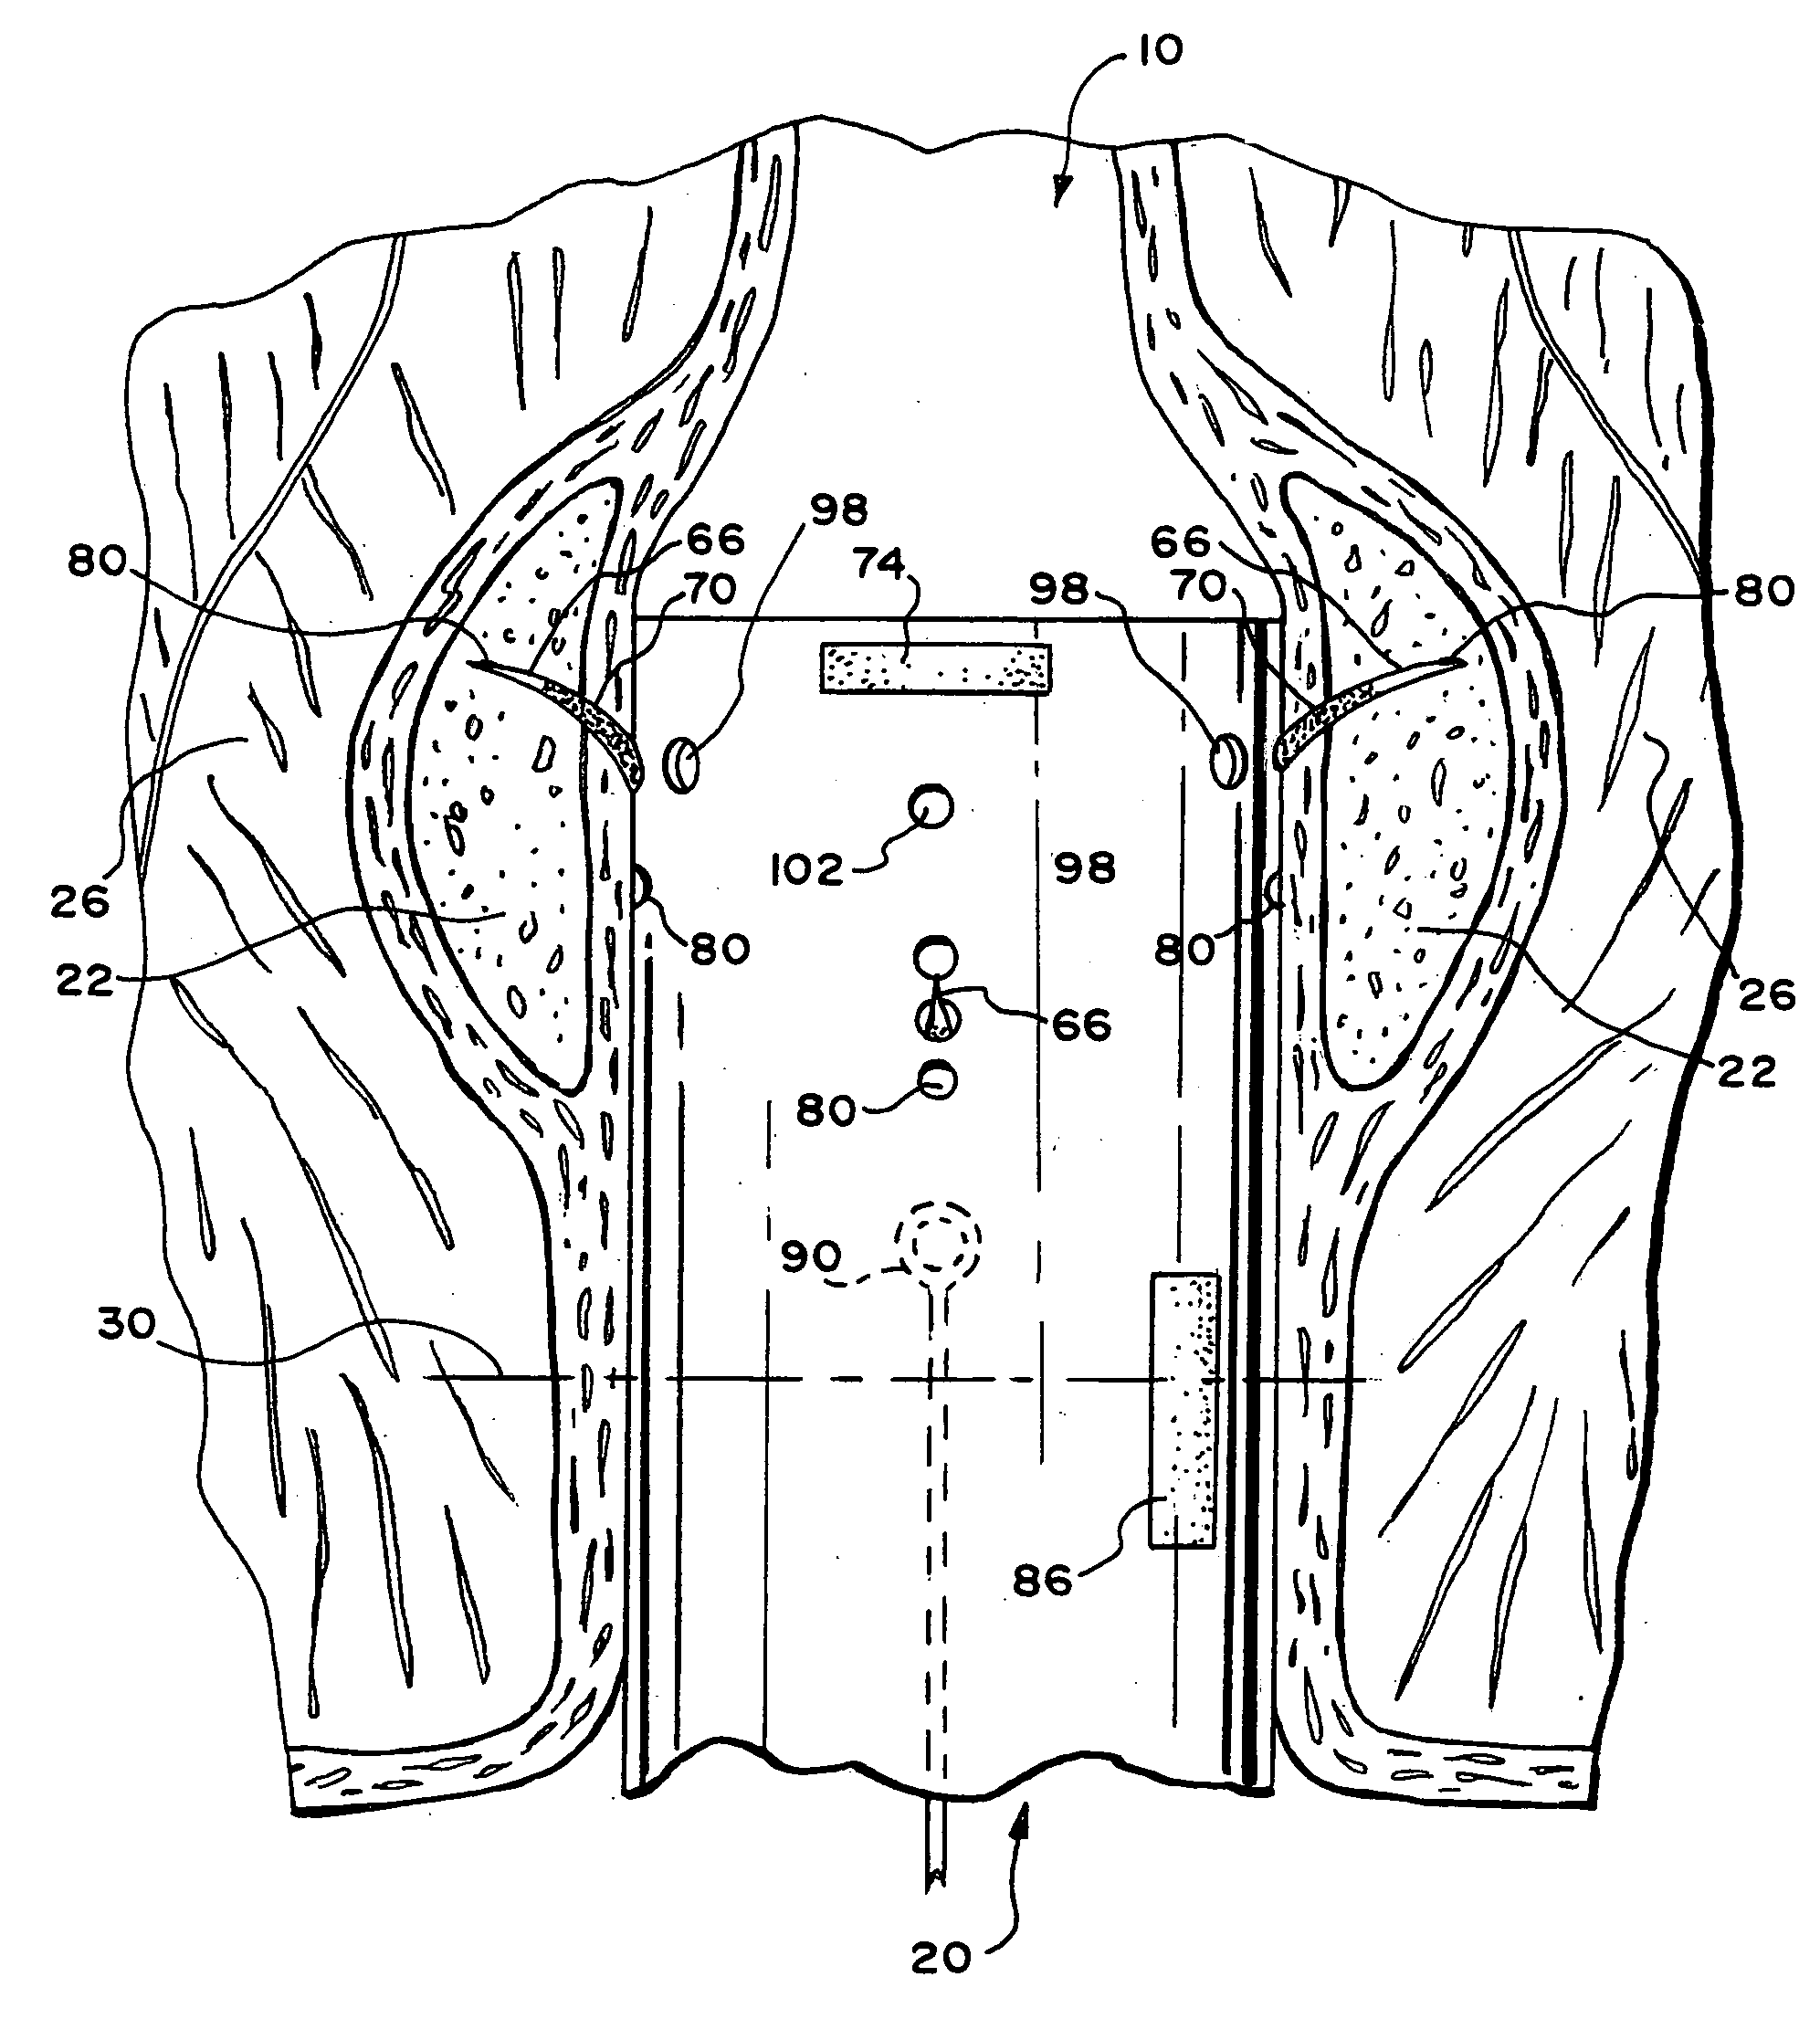 Method for treating fecal incontinence